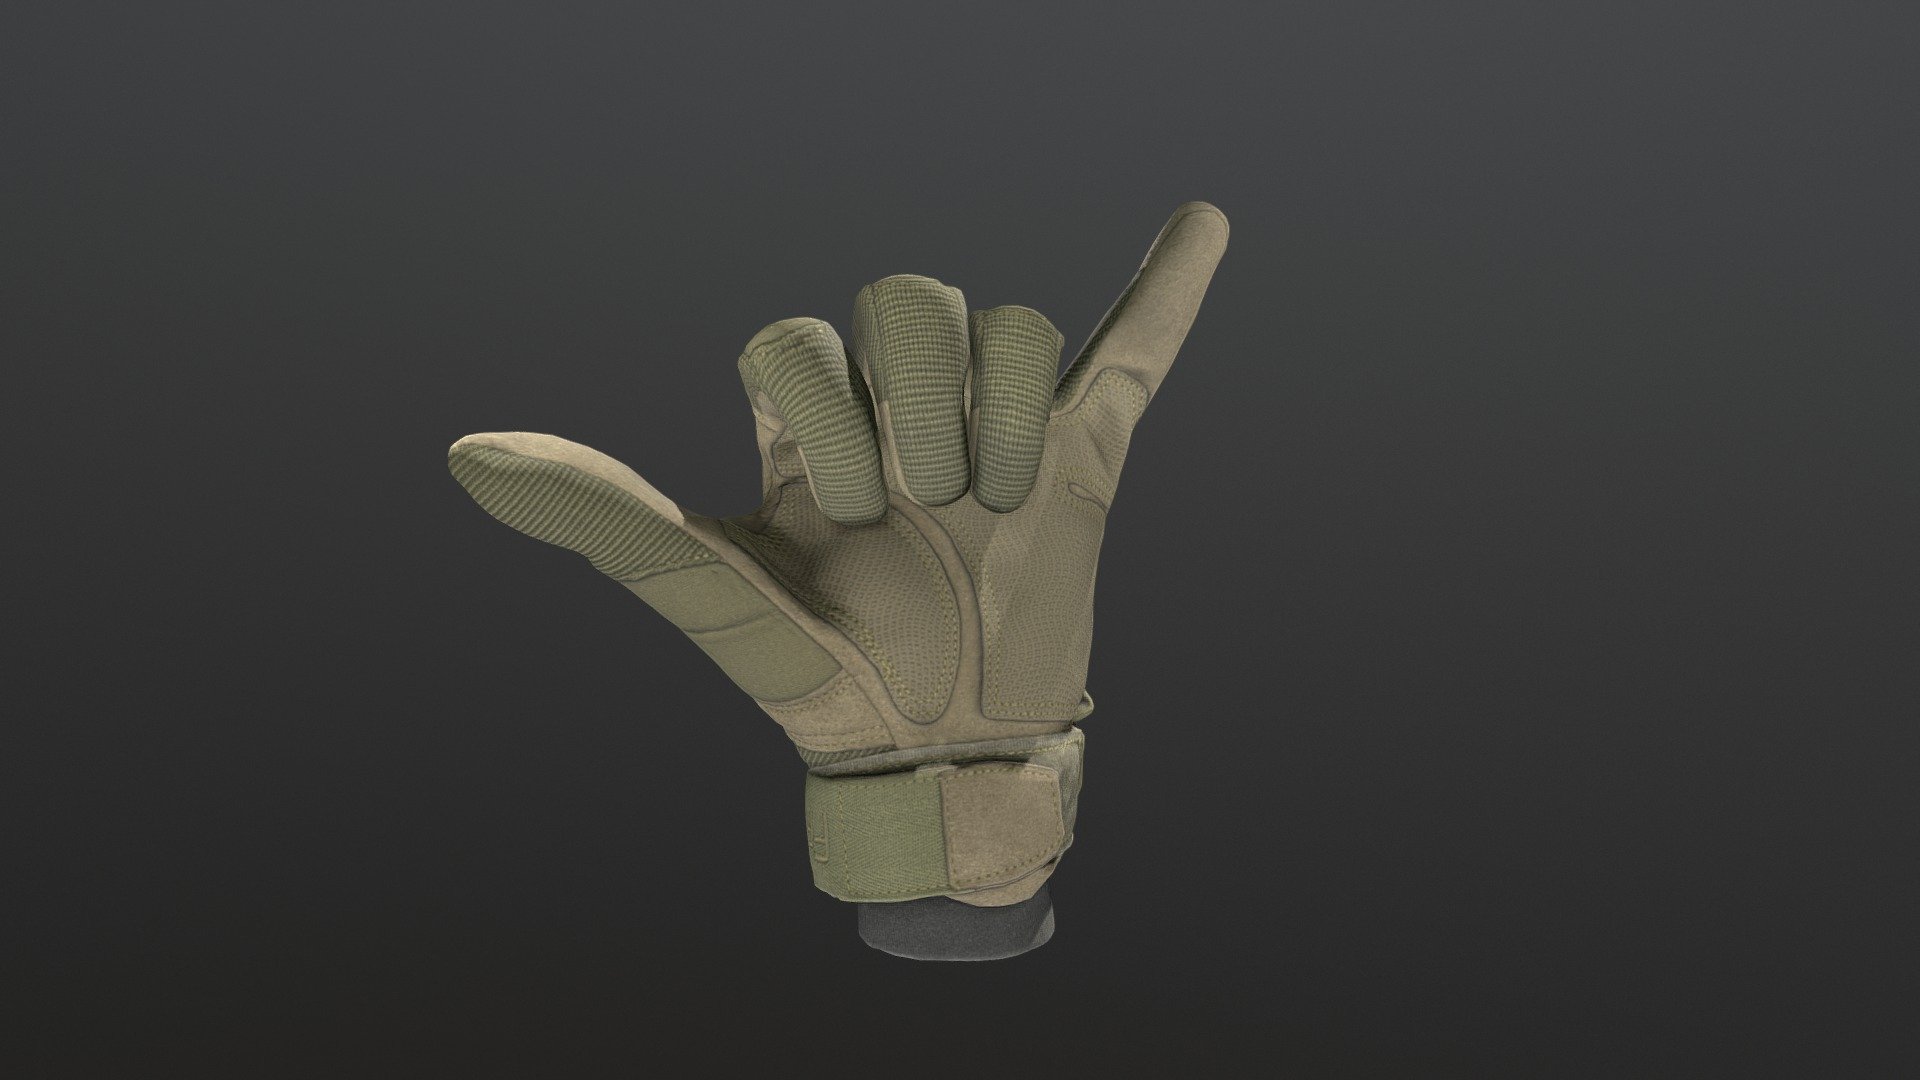 3D-scanned tactical glove (armored paintball or warfare hand protection), skinned and animated into a few hand positions

Retopologized to efficient quads, UVs and re-projected texture

All textures are 8192x8192 pixels - Tactical Glove with hand positions - Buy Royalty Free 3D model by omegadarling 3d model